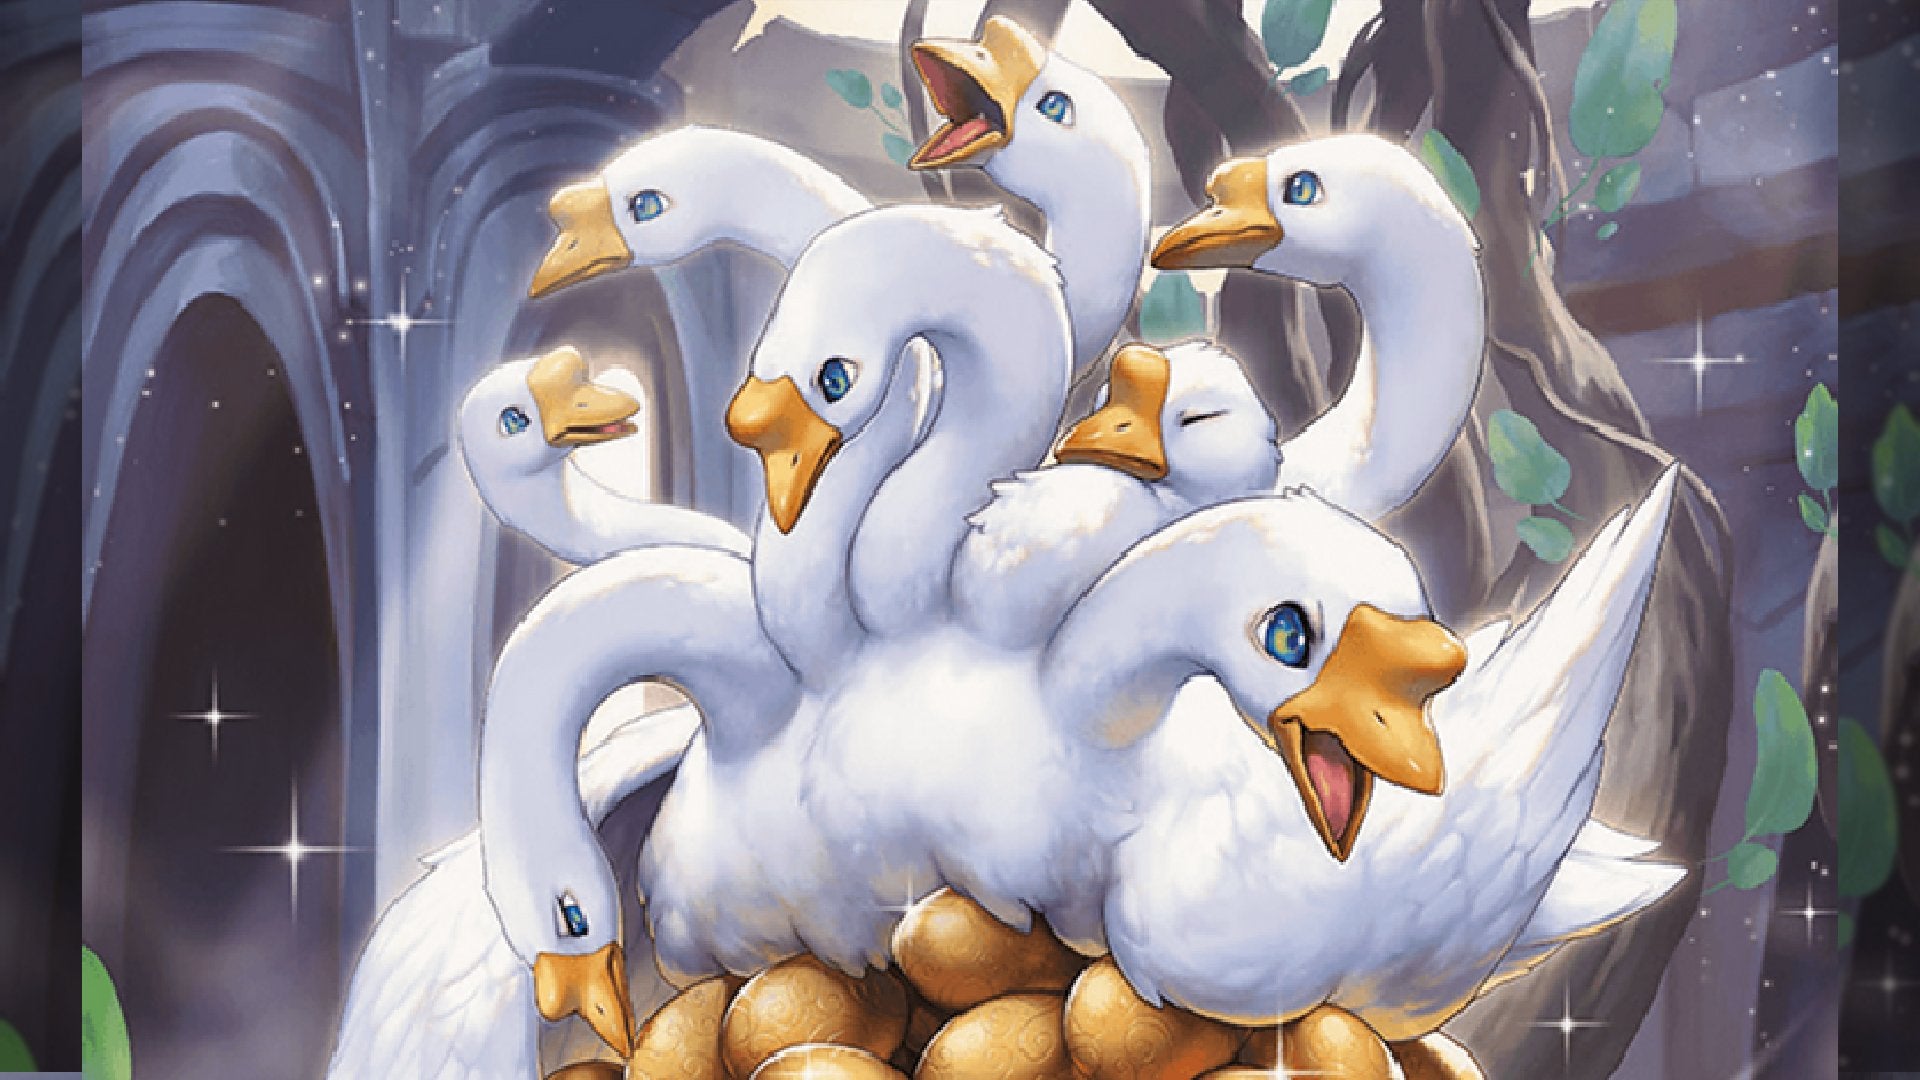 The Goose Mother from MTG sitting on a pile of golden eggs.